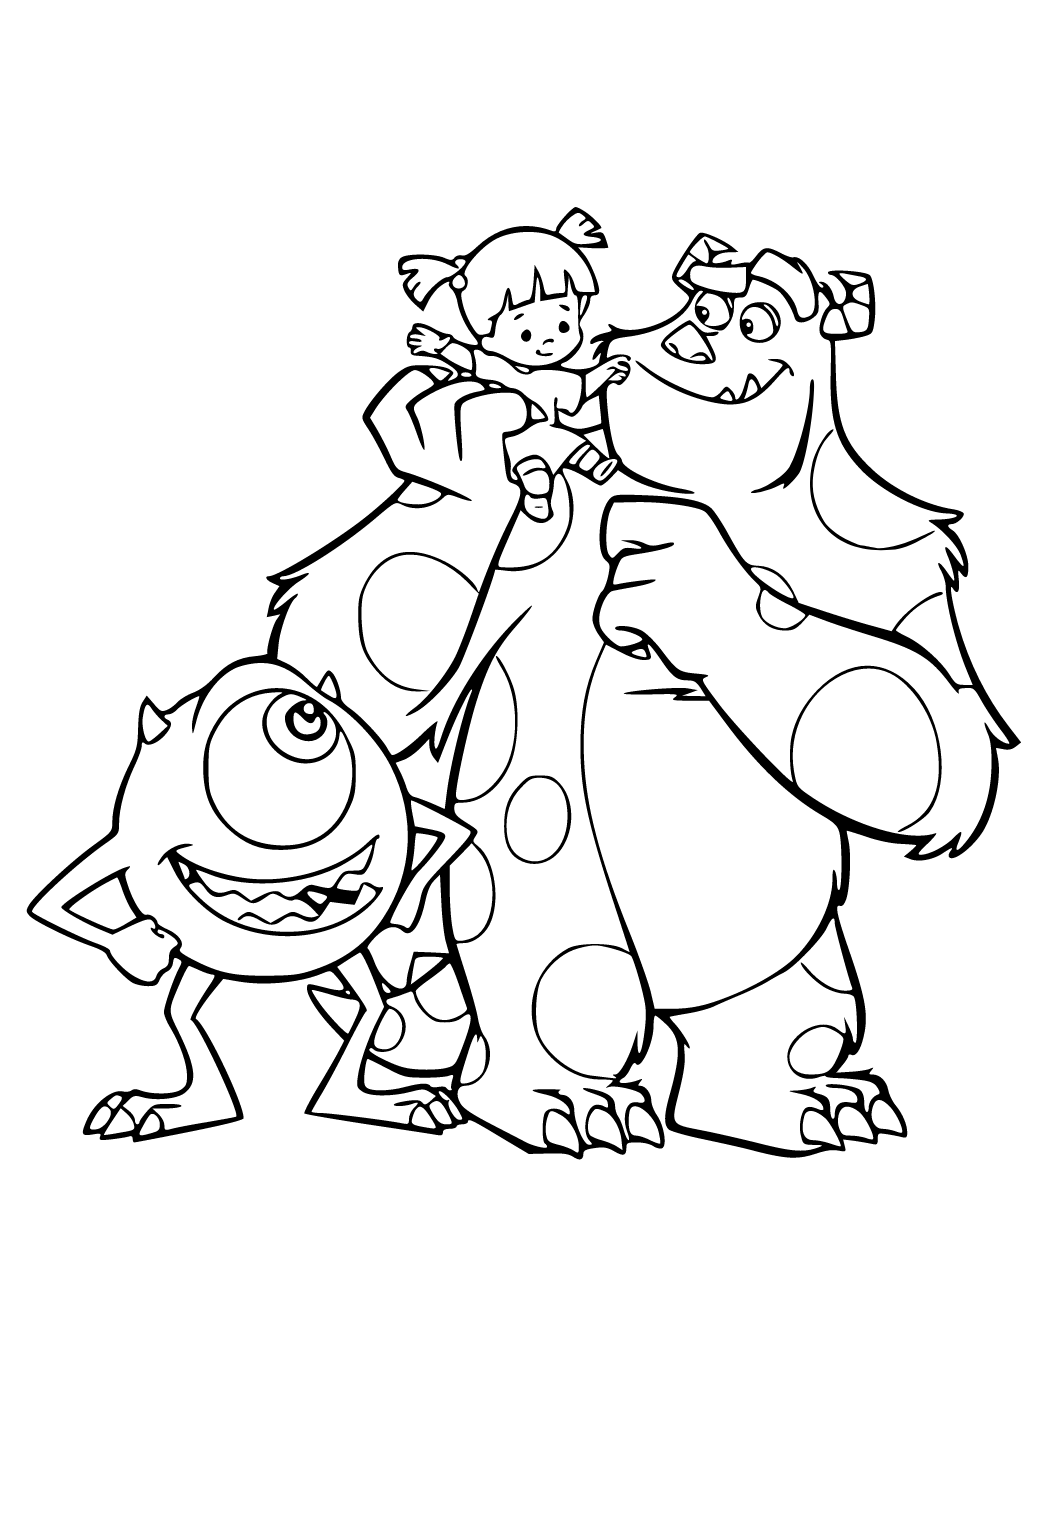 Sulley Monsters Inc Coloring Pages - Get Coloring Pages